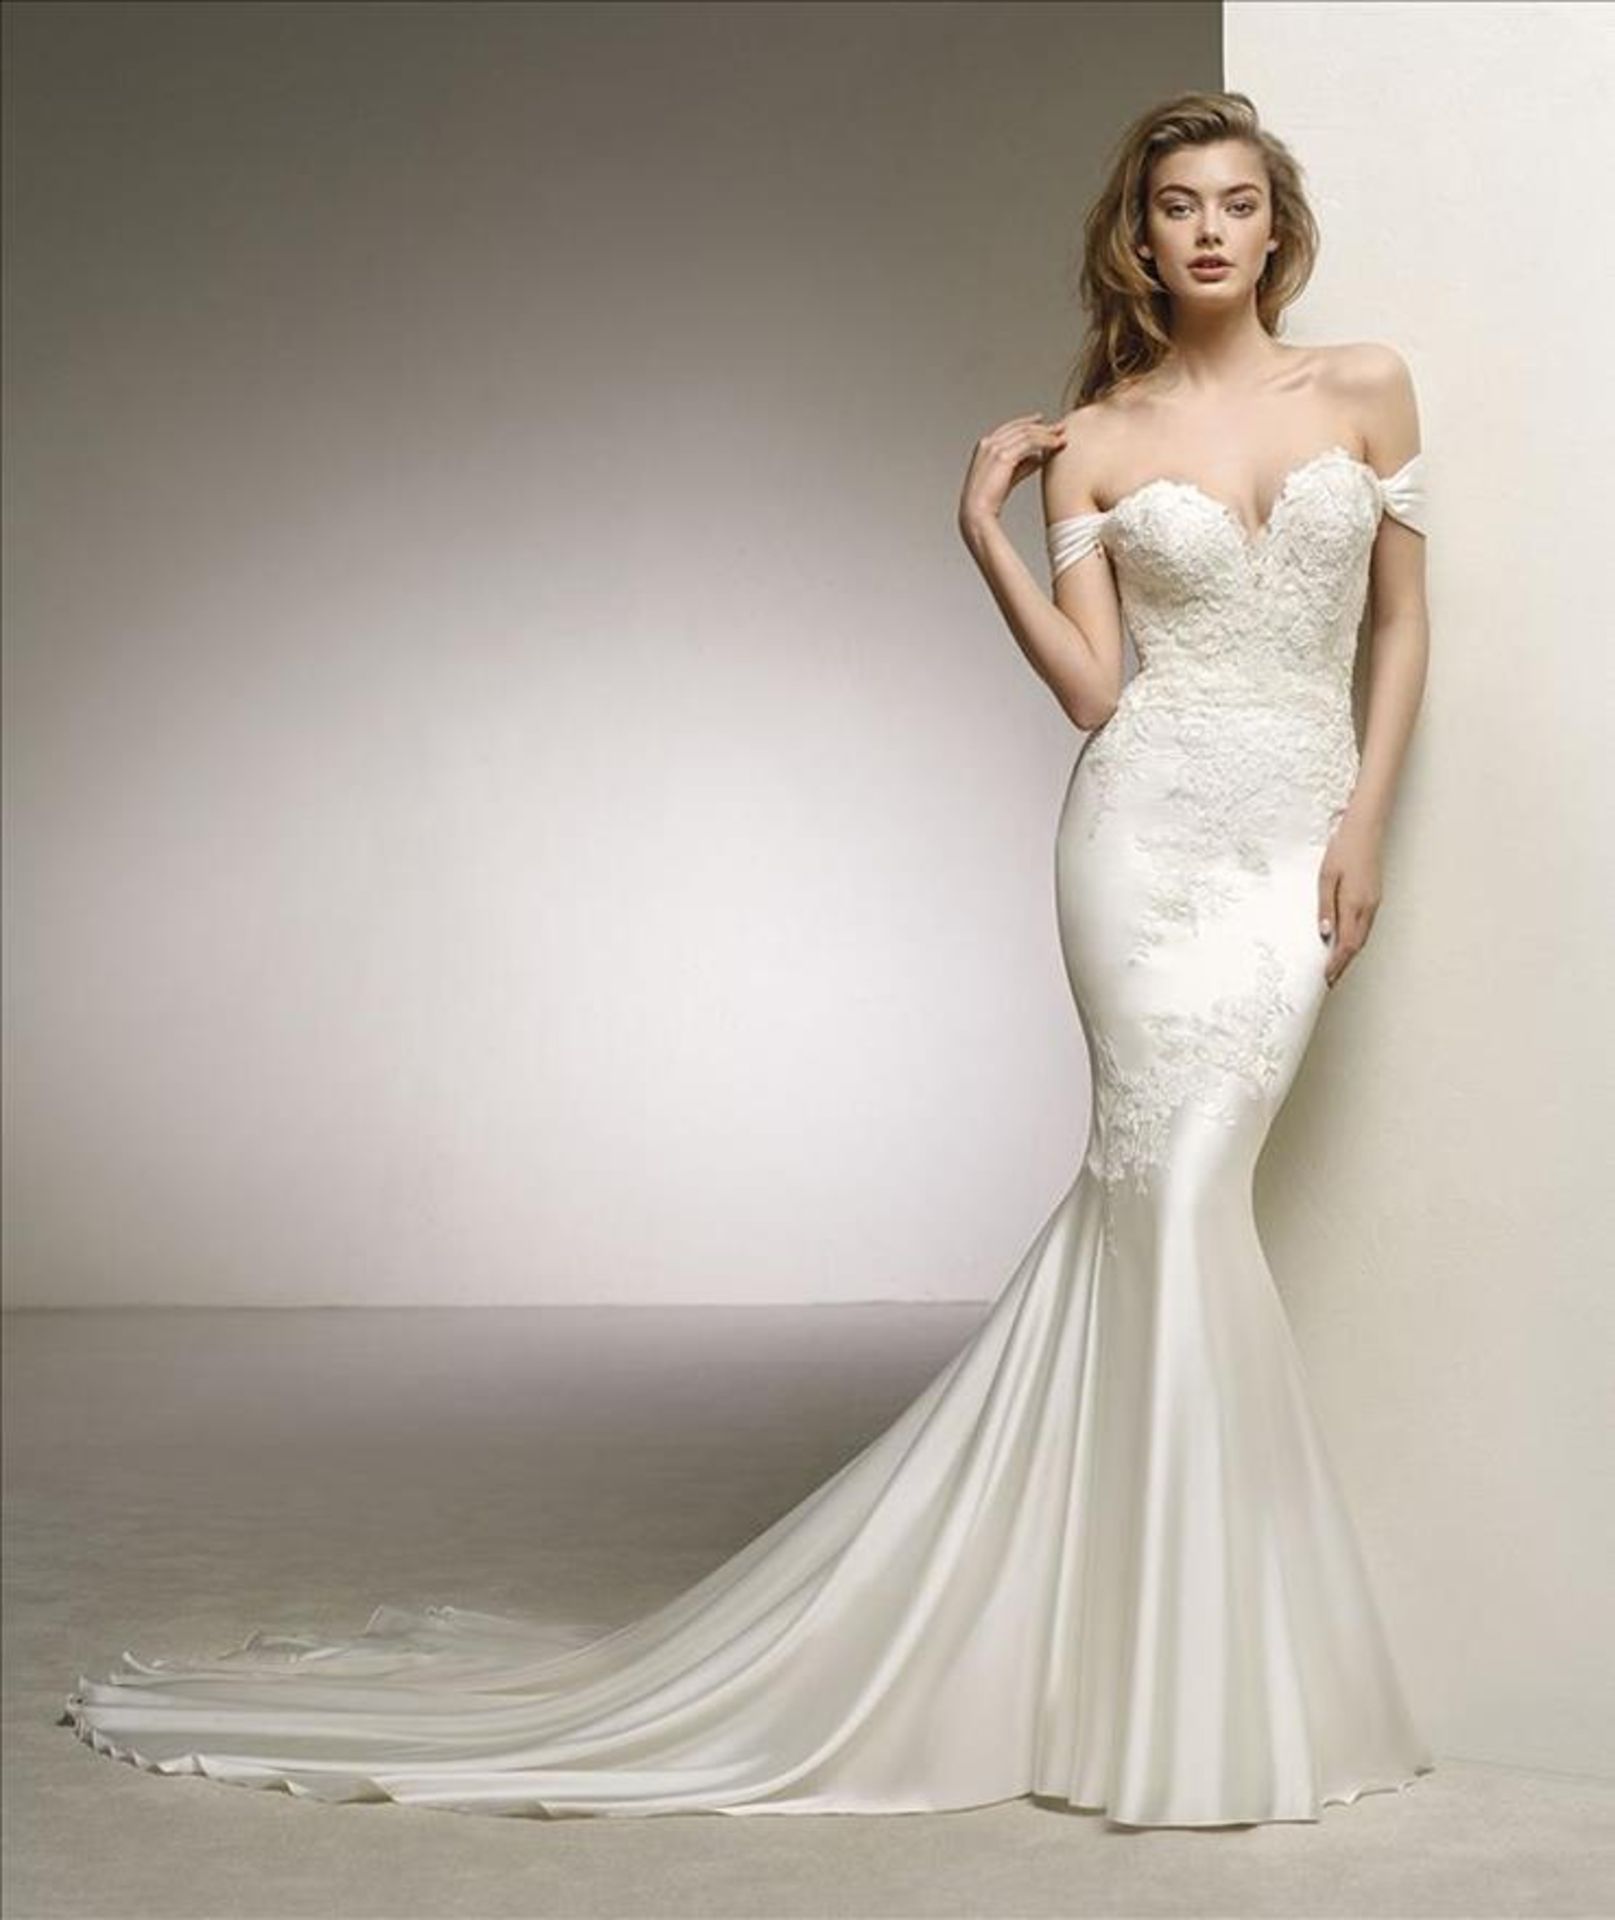 1 x Pronovious Dante Mermaid Bridal Gown With Floral Lace Highlights - Size UK 10 - RRP £1,640 - Image 3 of 13